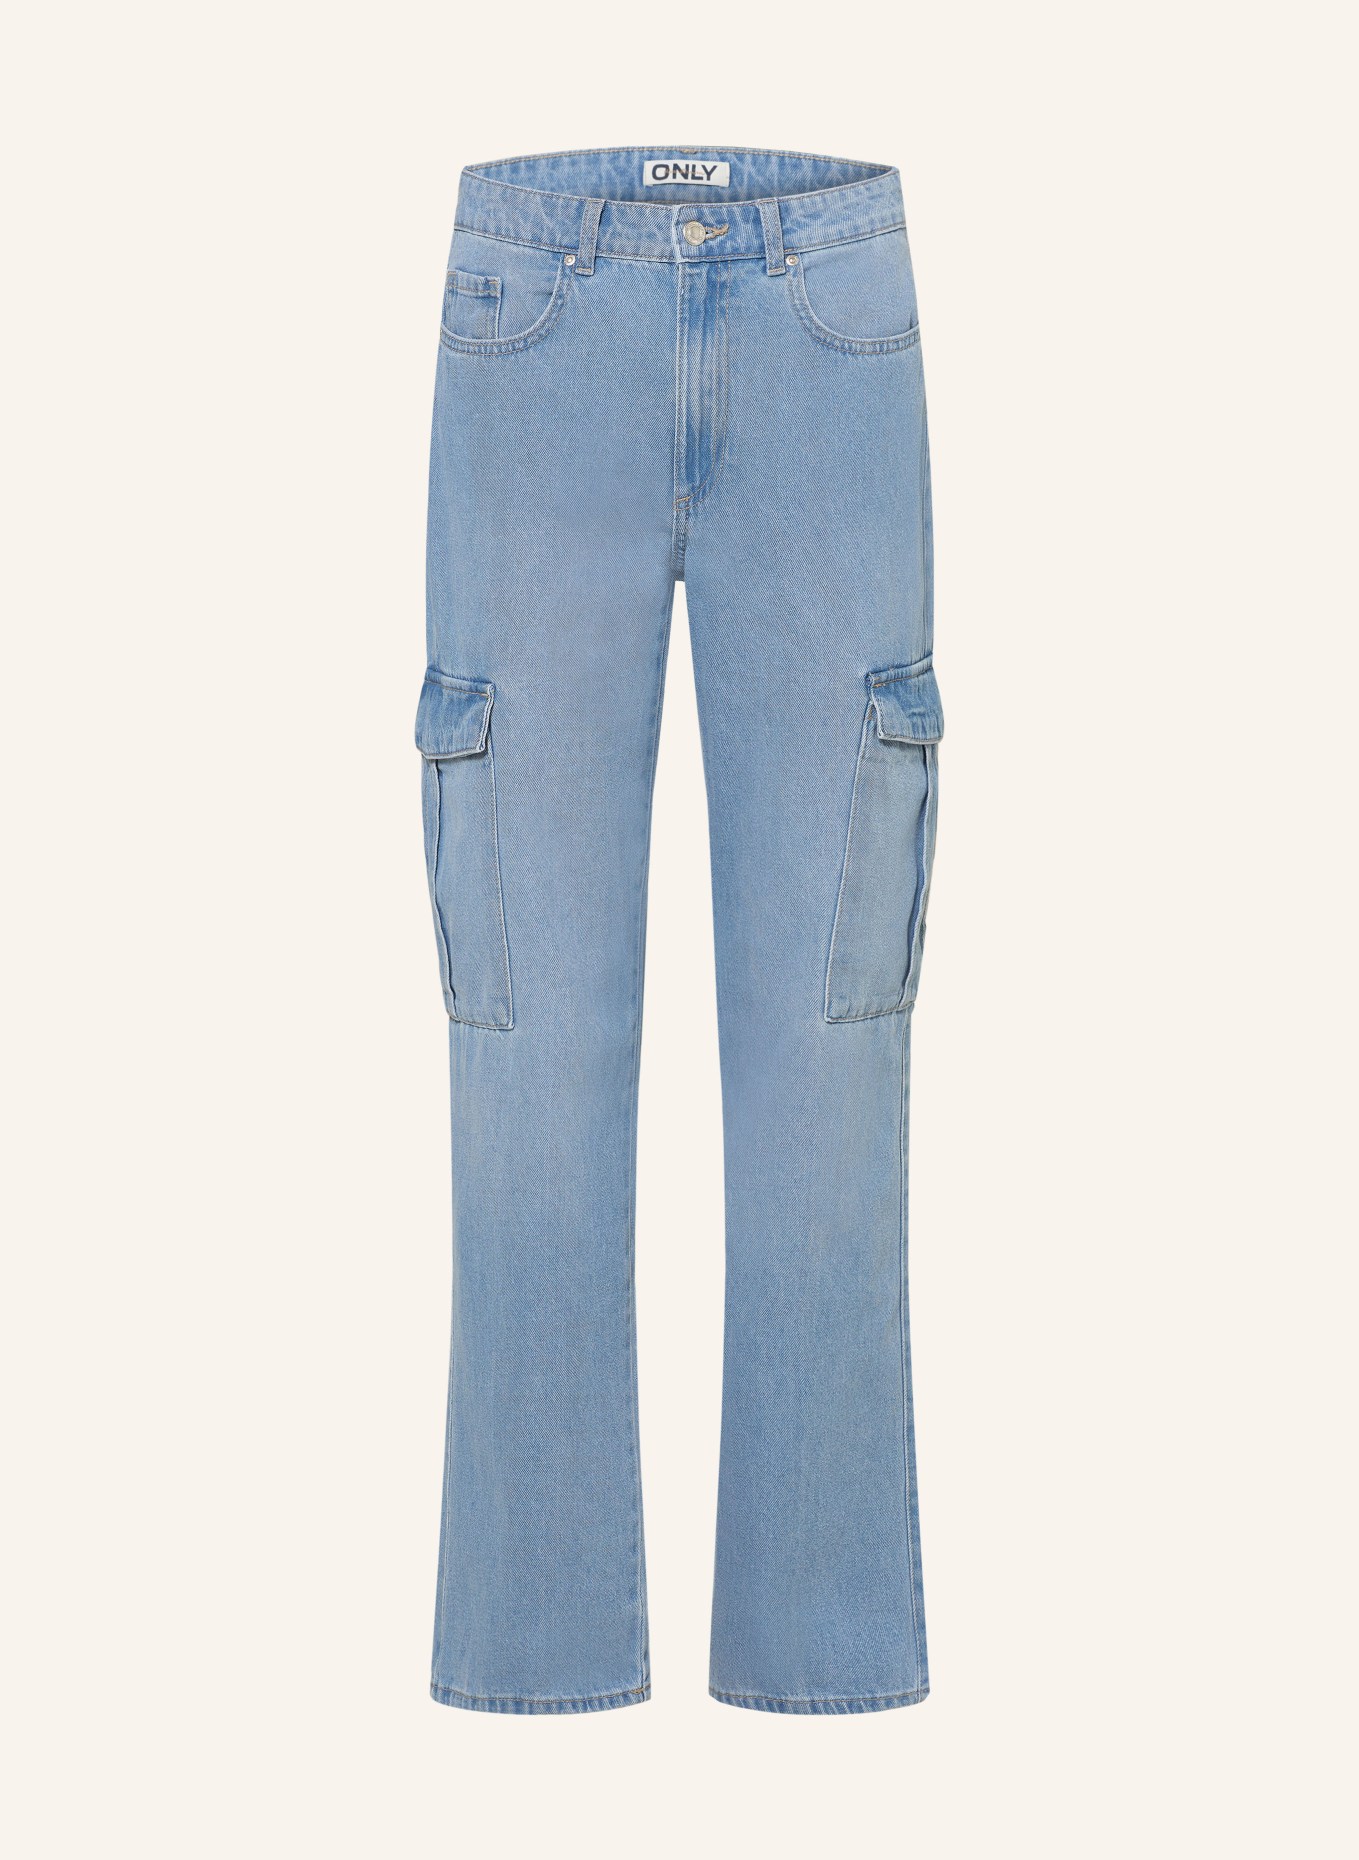 ONLY Cargo jeans, Color: BLUE (Image 1)